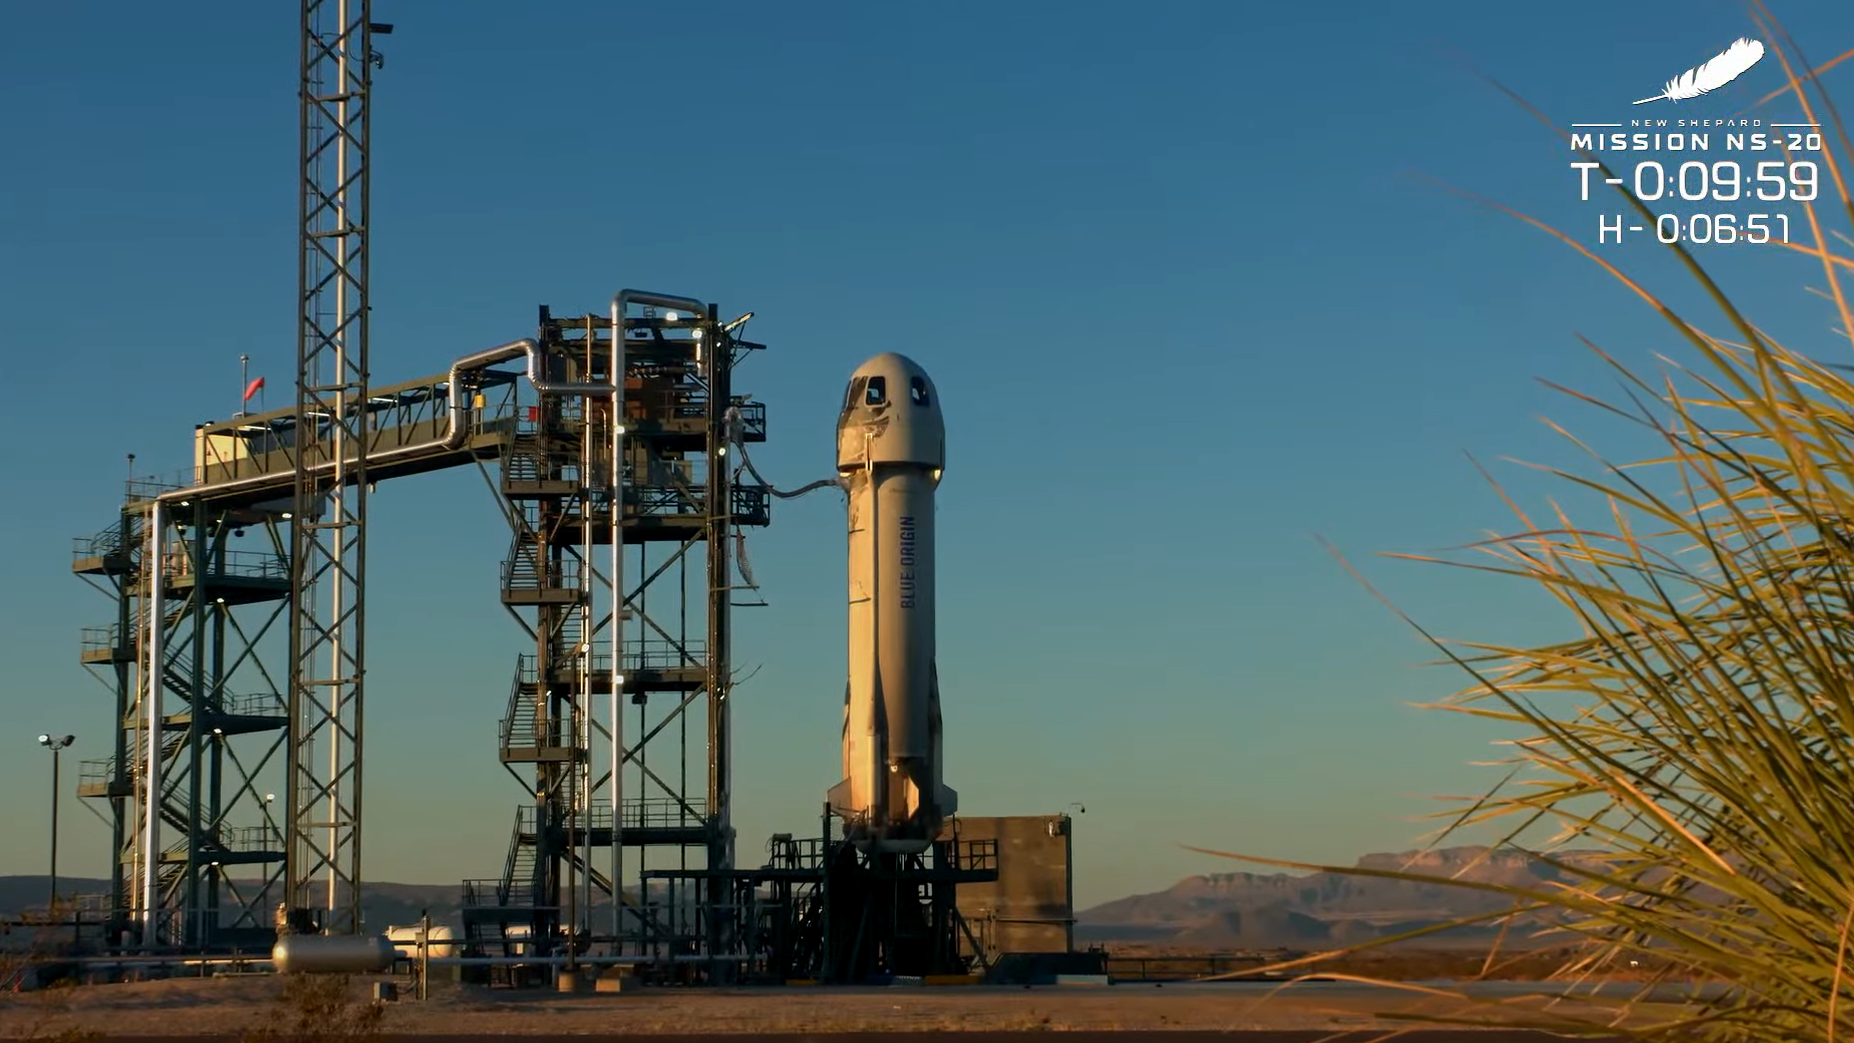 A view of Blue Origin's New Shepard vehicle on the launch pad on March 31, 2022.